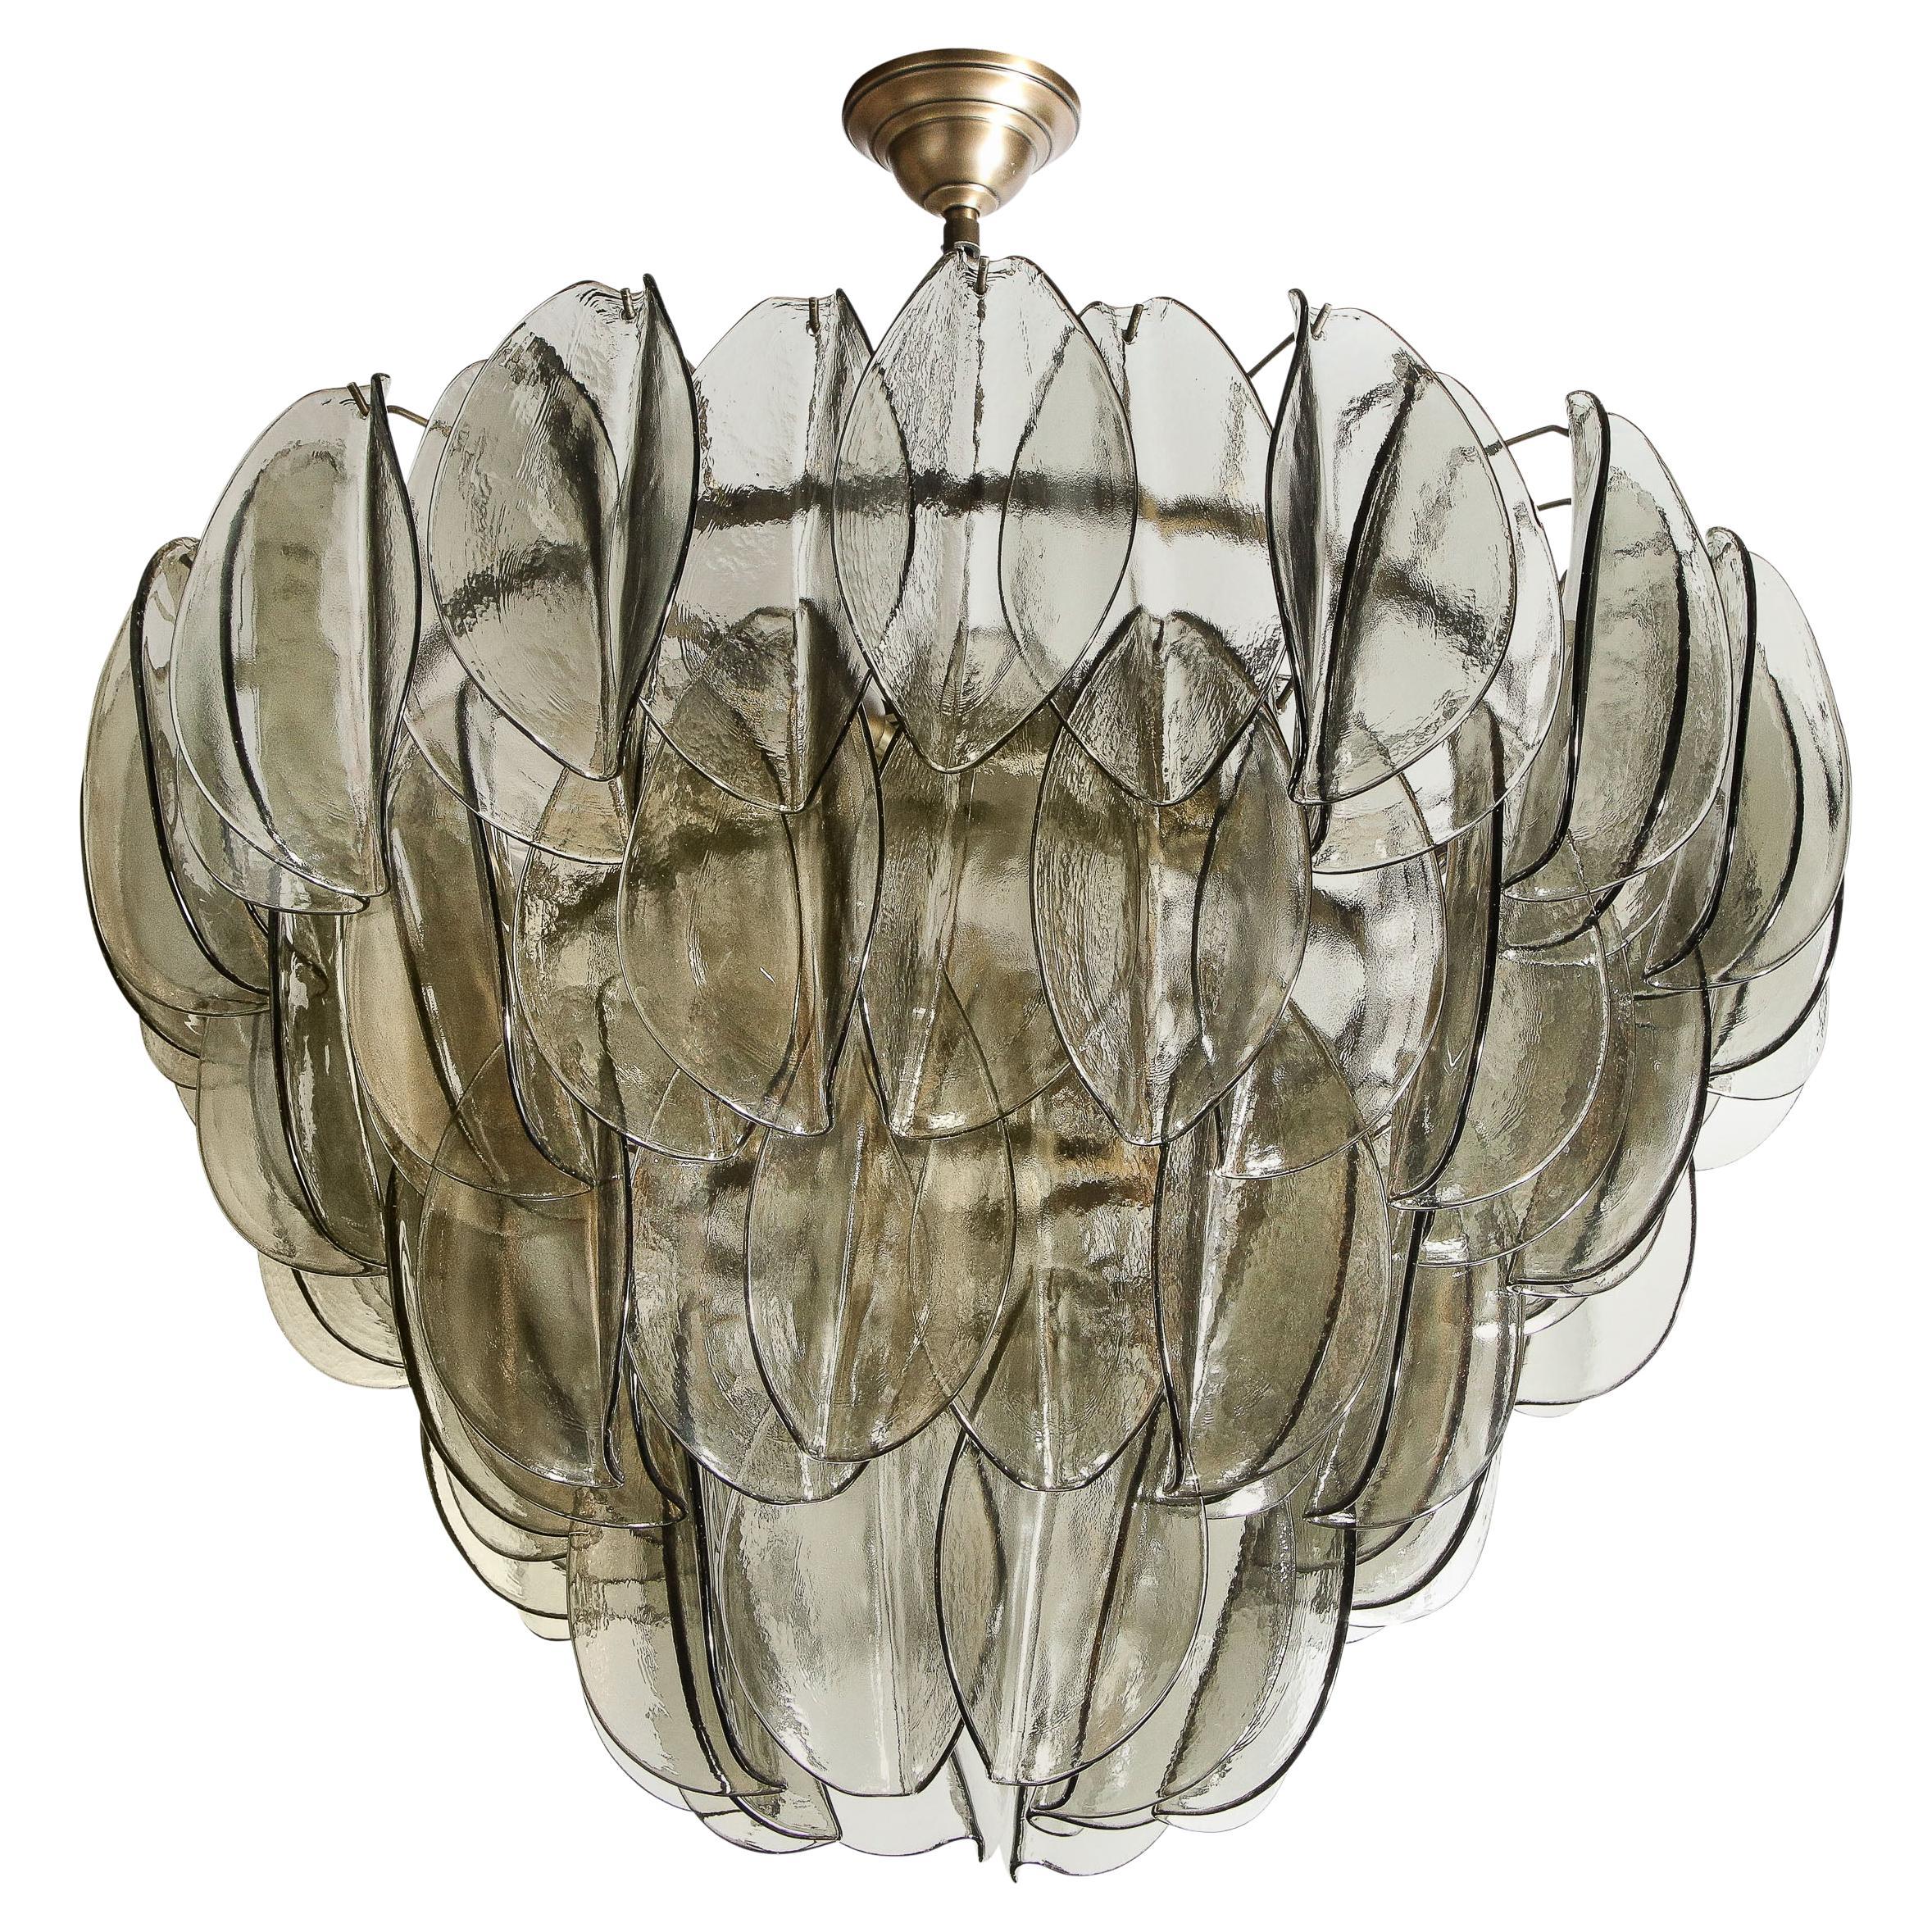 Modernist Feather Chandelier in Murano Smoked Topaz Glass and Oil Rubbed Bronze